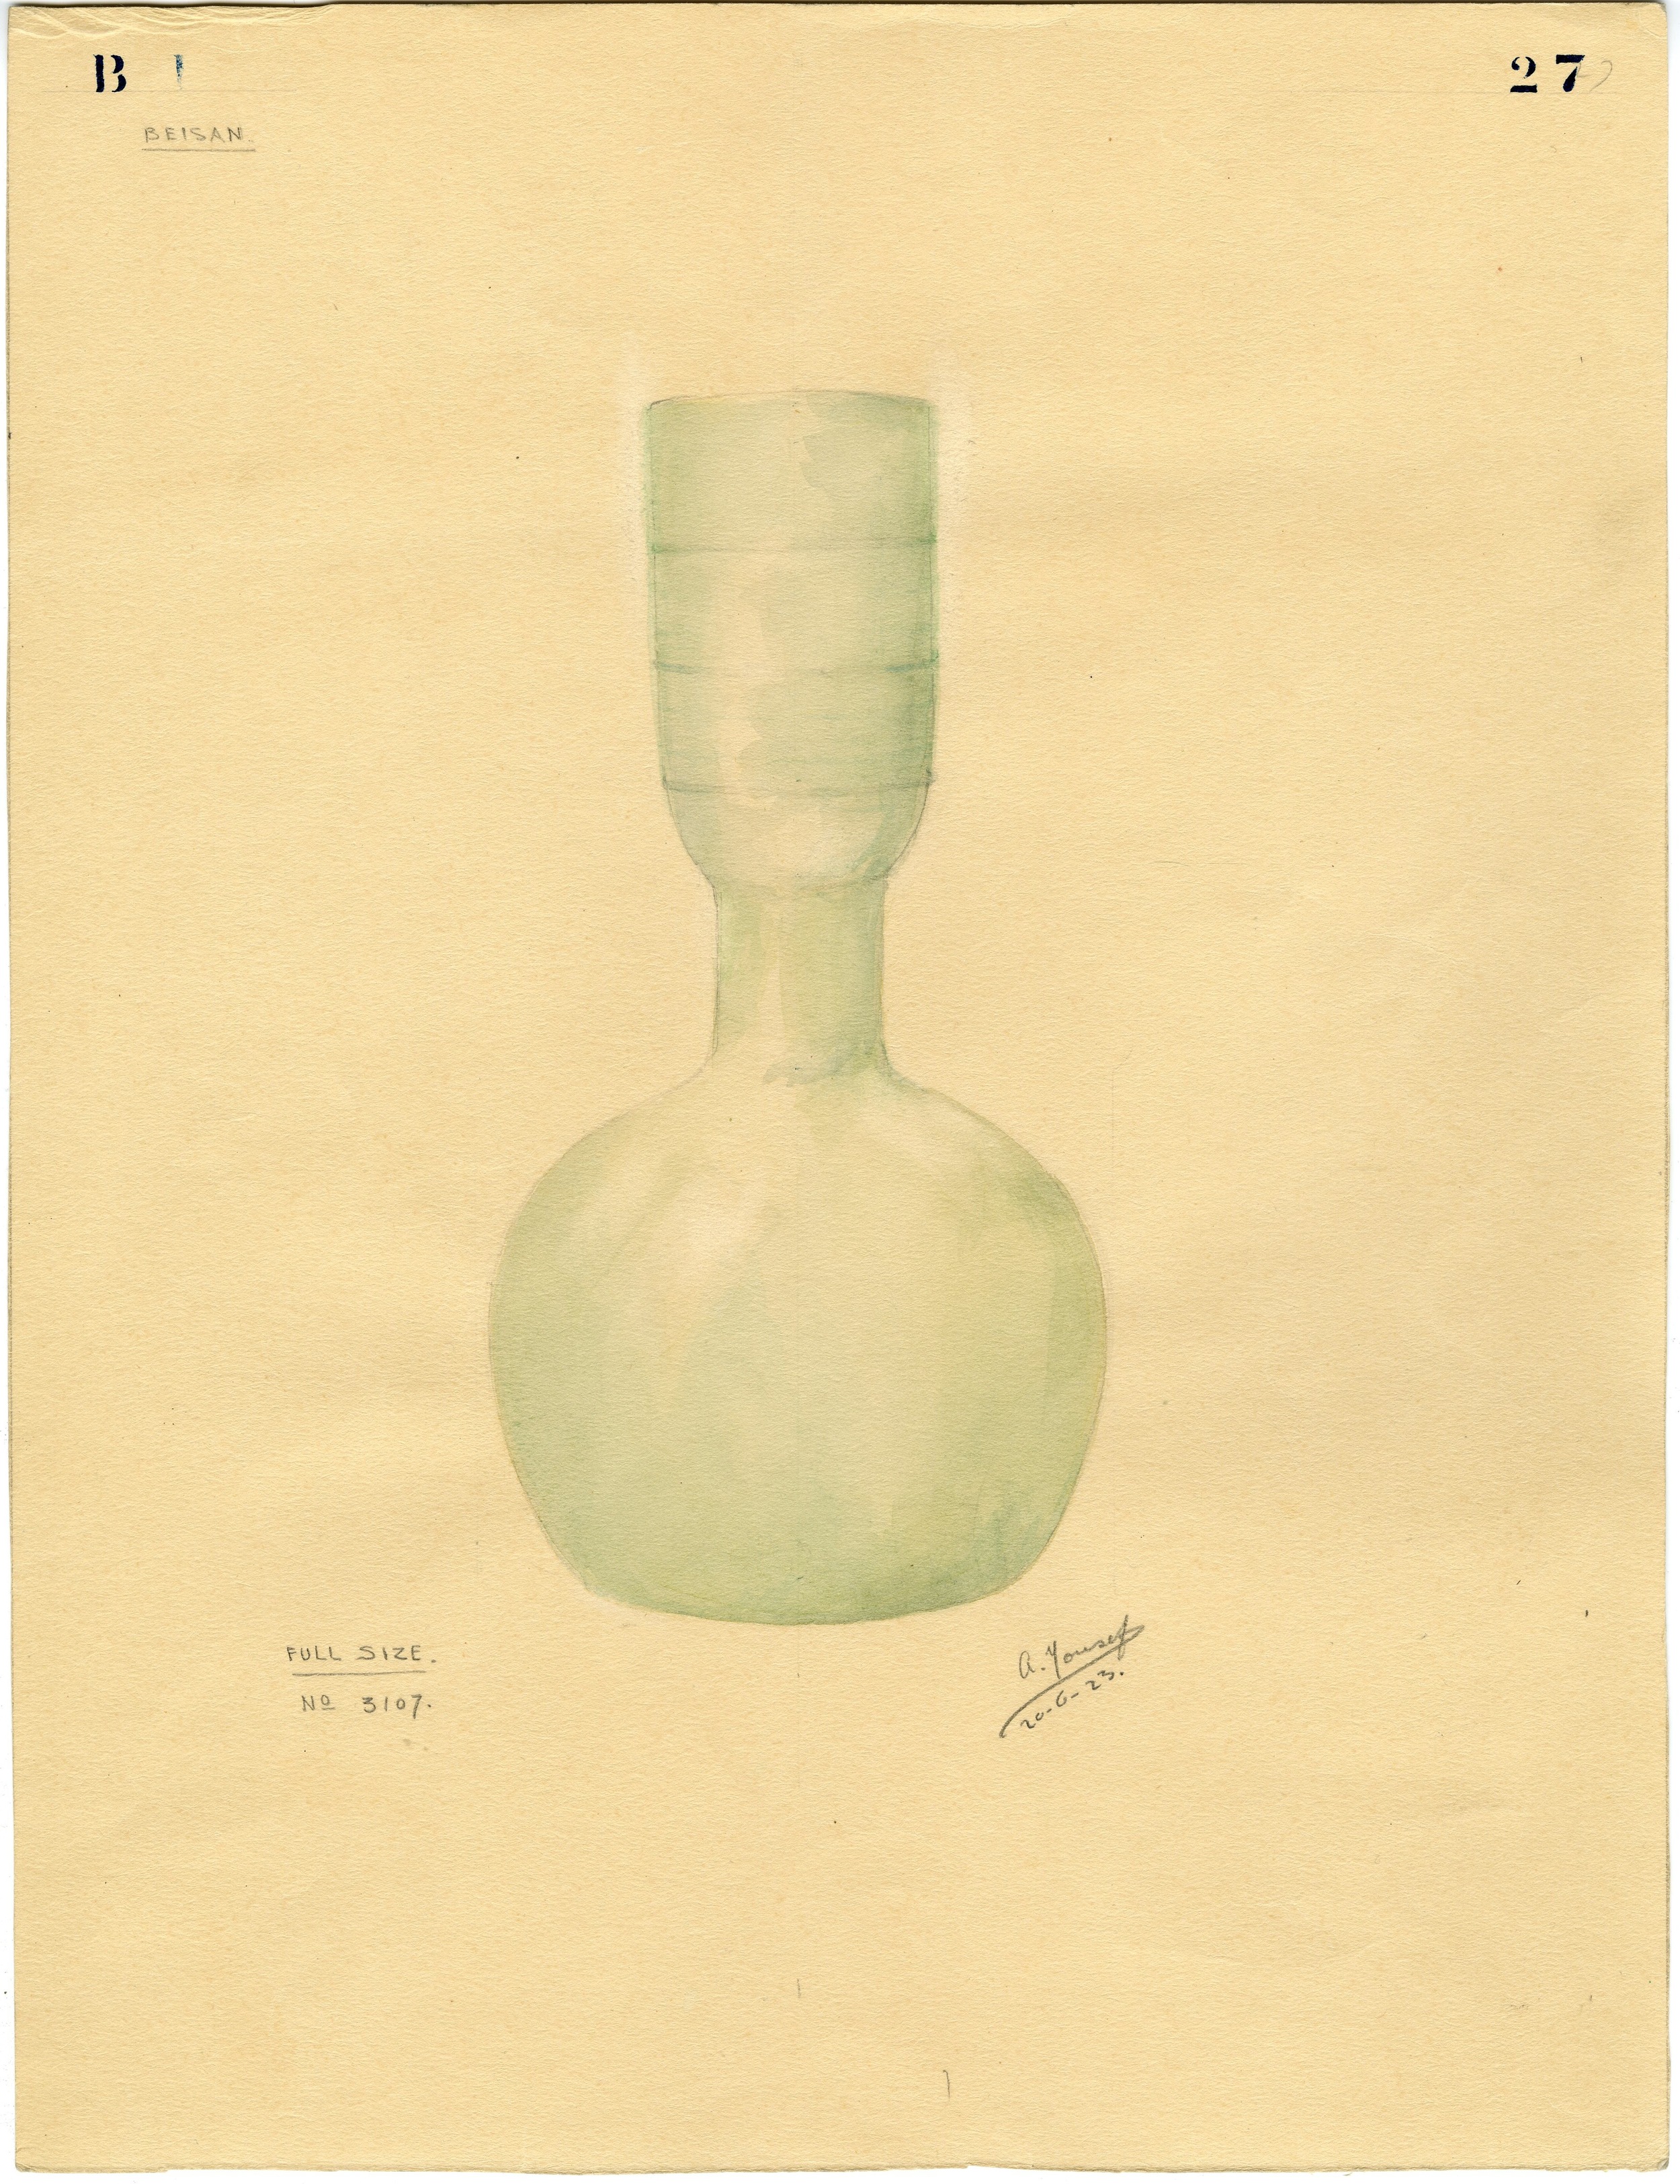 Watercolor of glass pot # 3107, from the Fisher excavations.